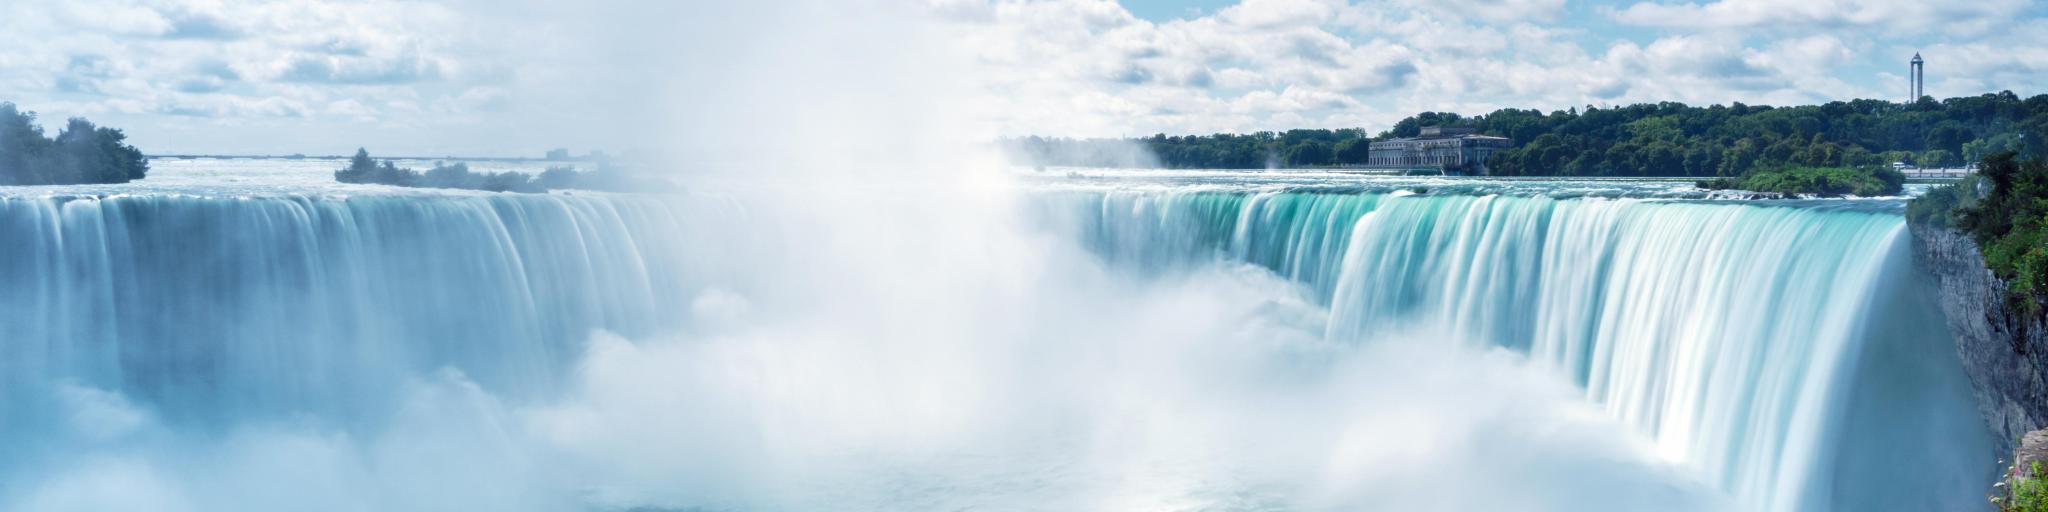 Niagara Falls, Ontario, Canada with a view of Horseshoe Fall on a sunny day.